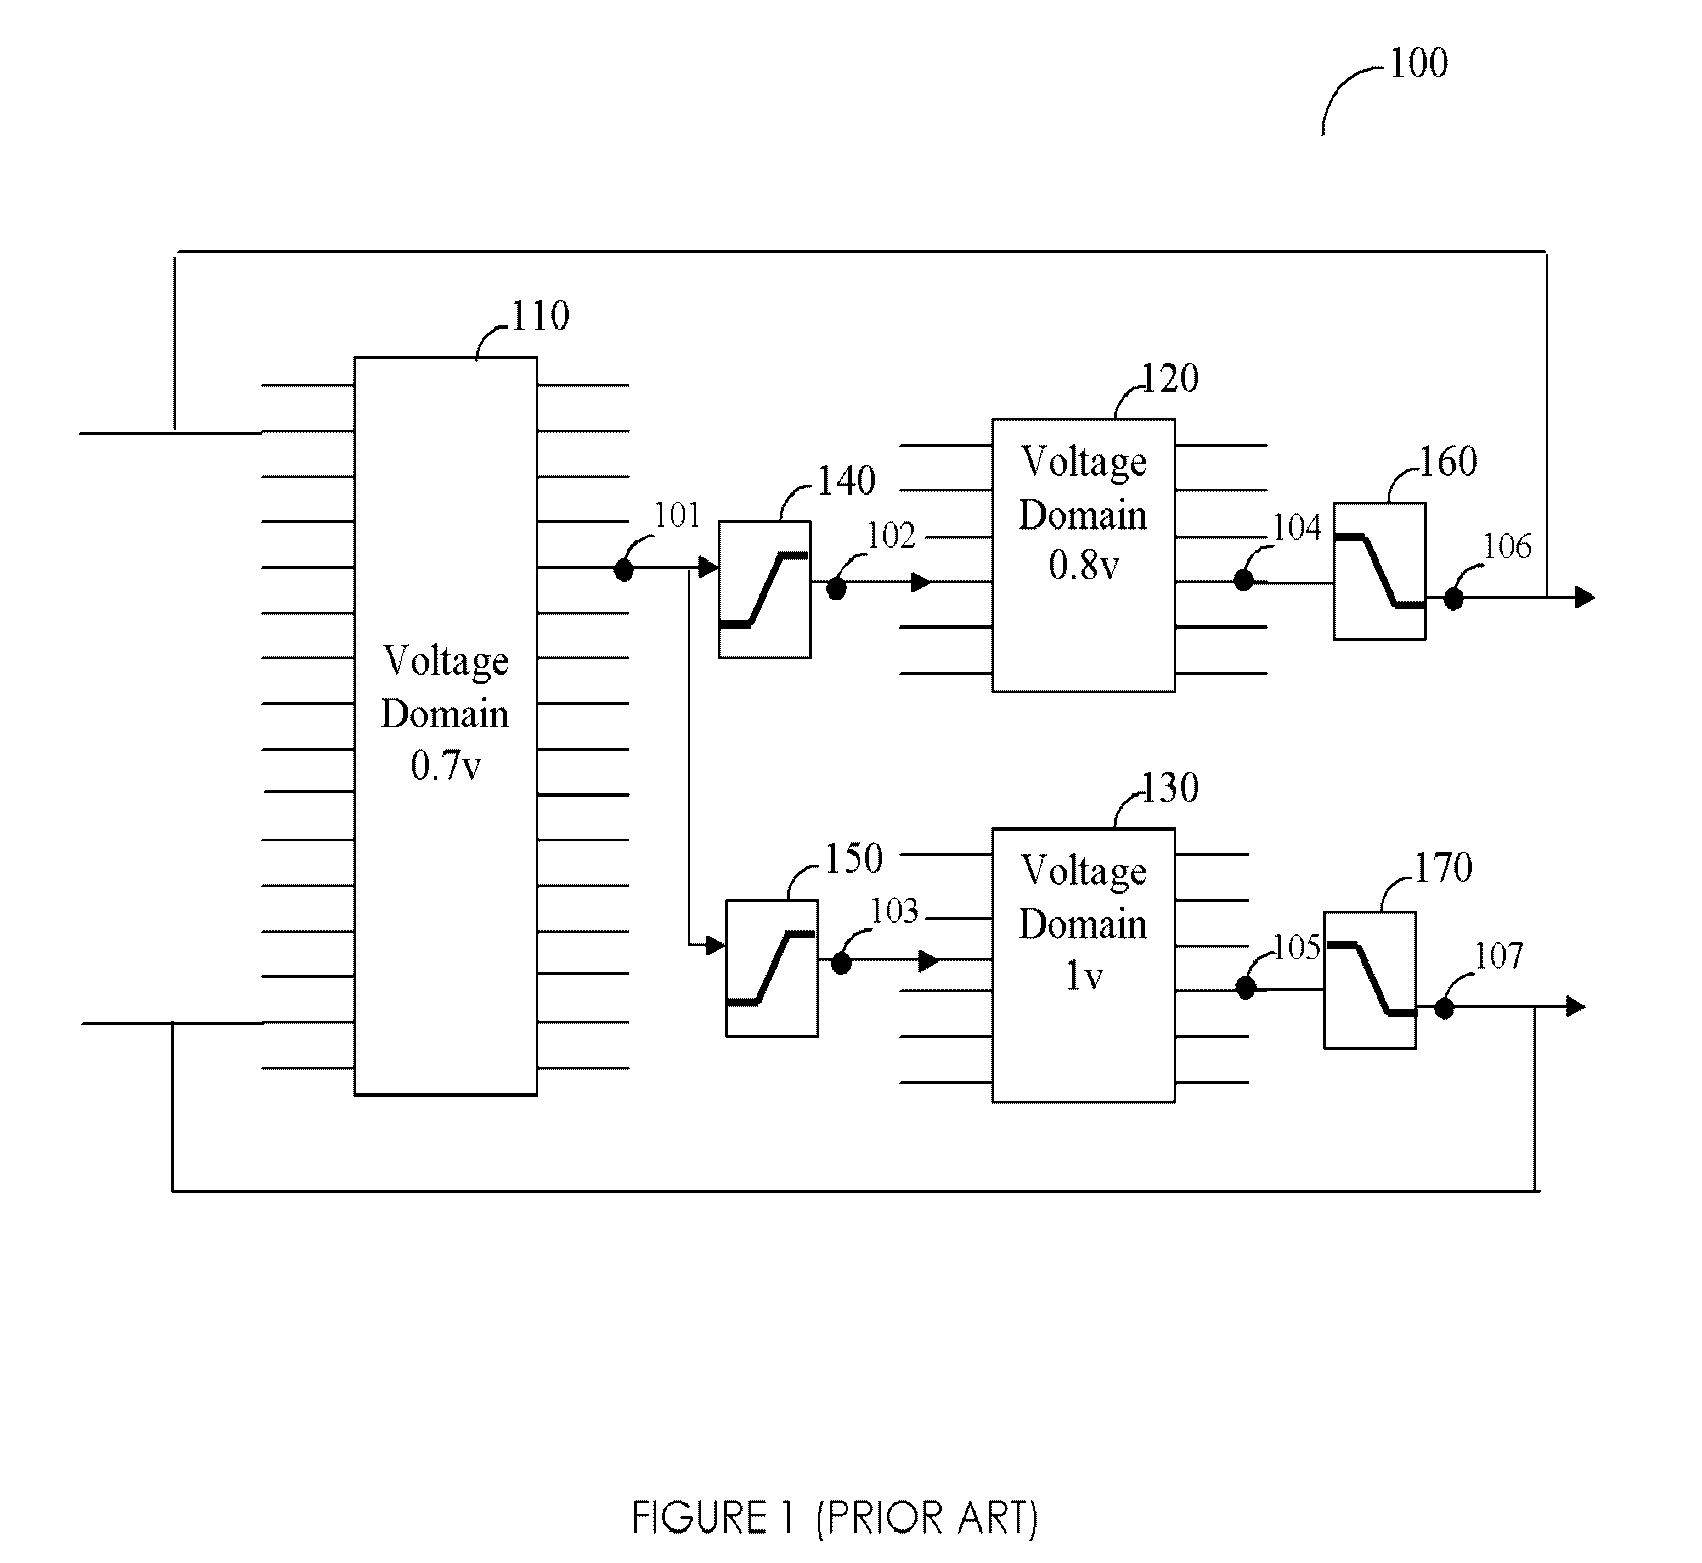 A method, system, and computer program product for automatic insertion and correctness verification of level shifters in integrated circuits with multiple voltage domains